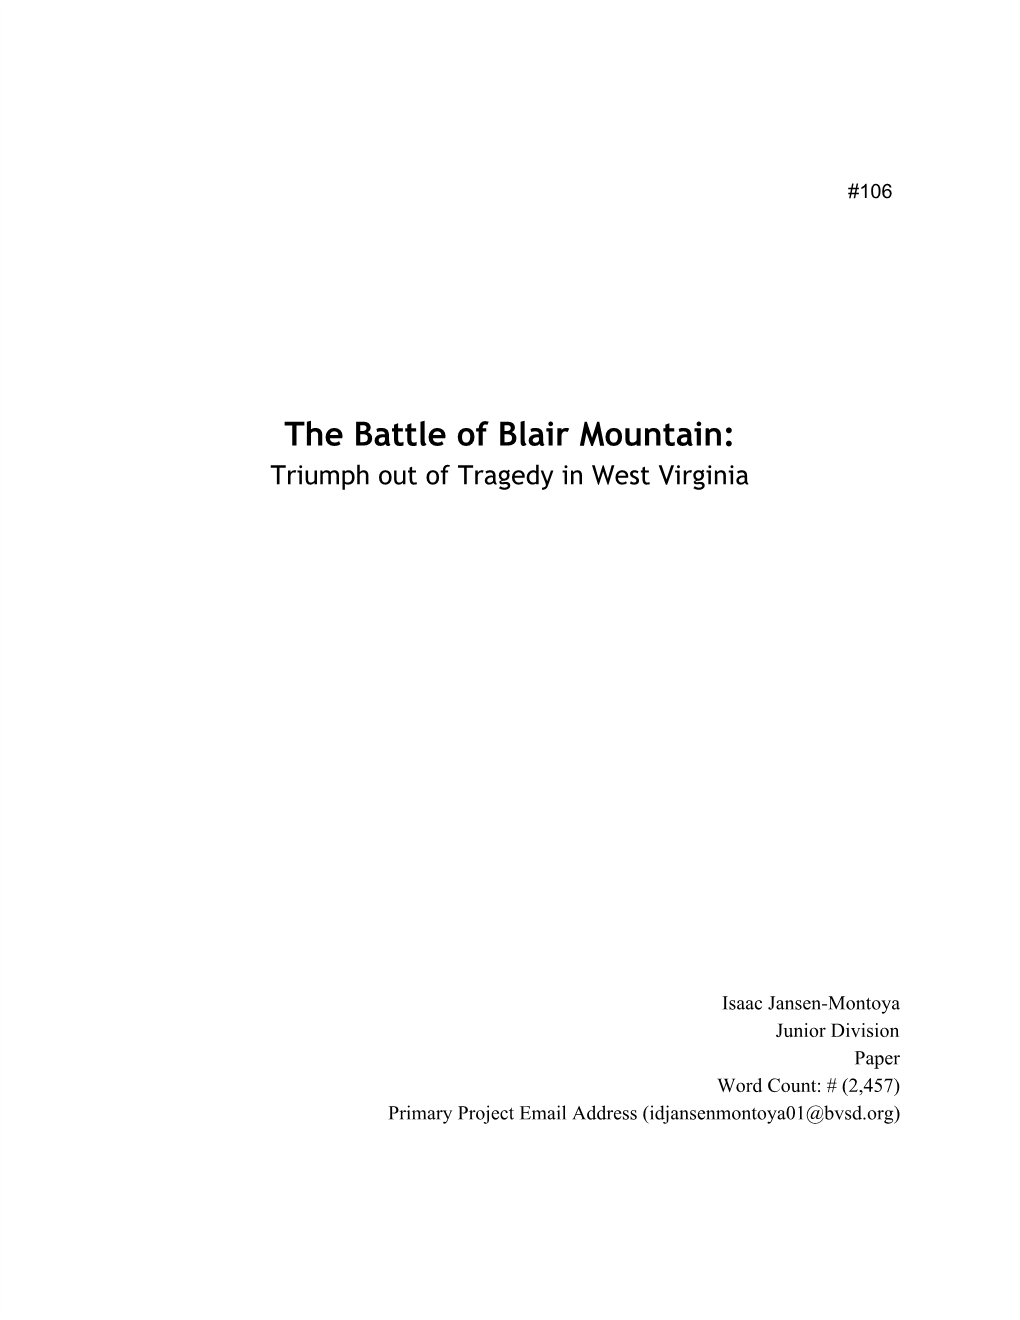 The Battle of Blair Mountain: Triumph out of Tragedy in West Virginia